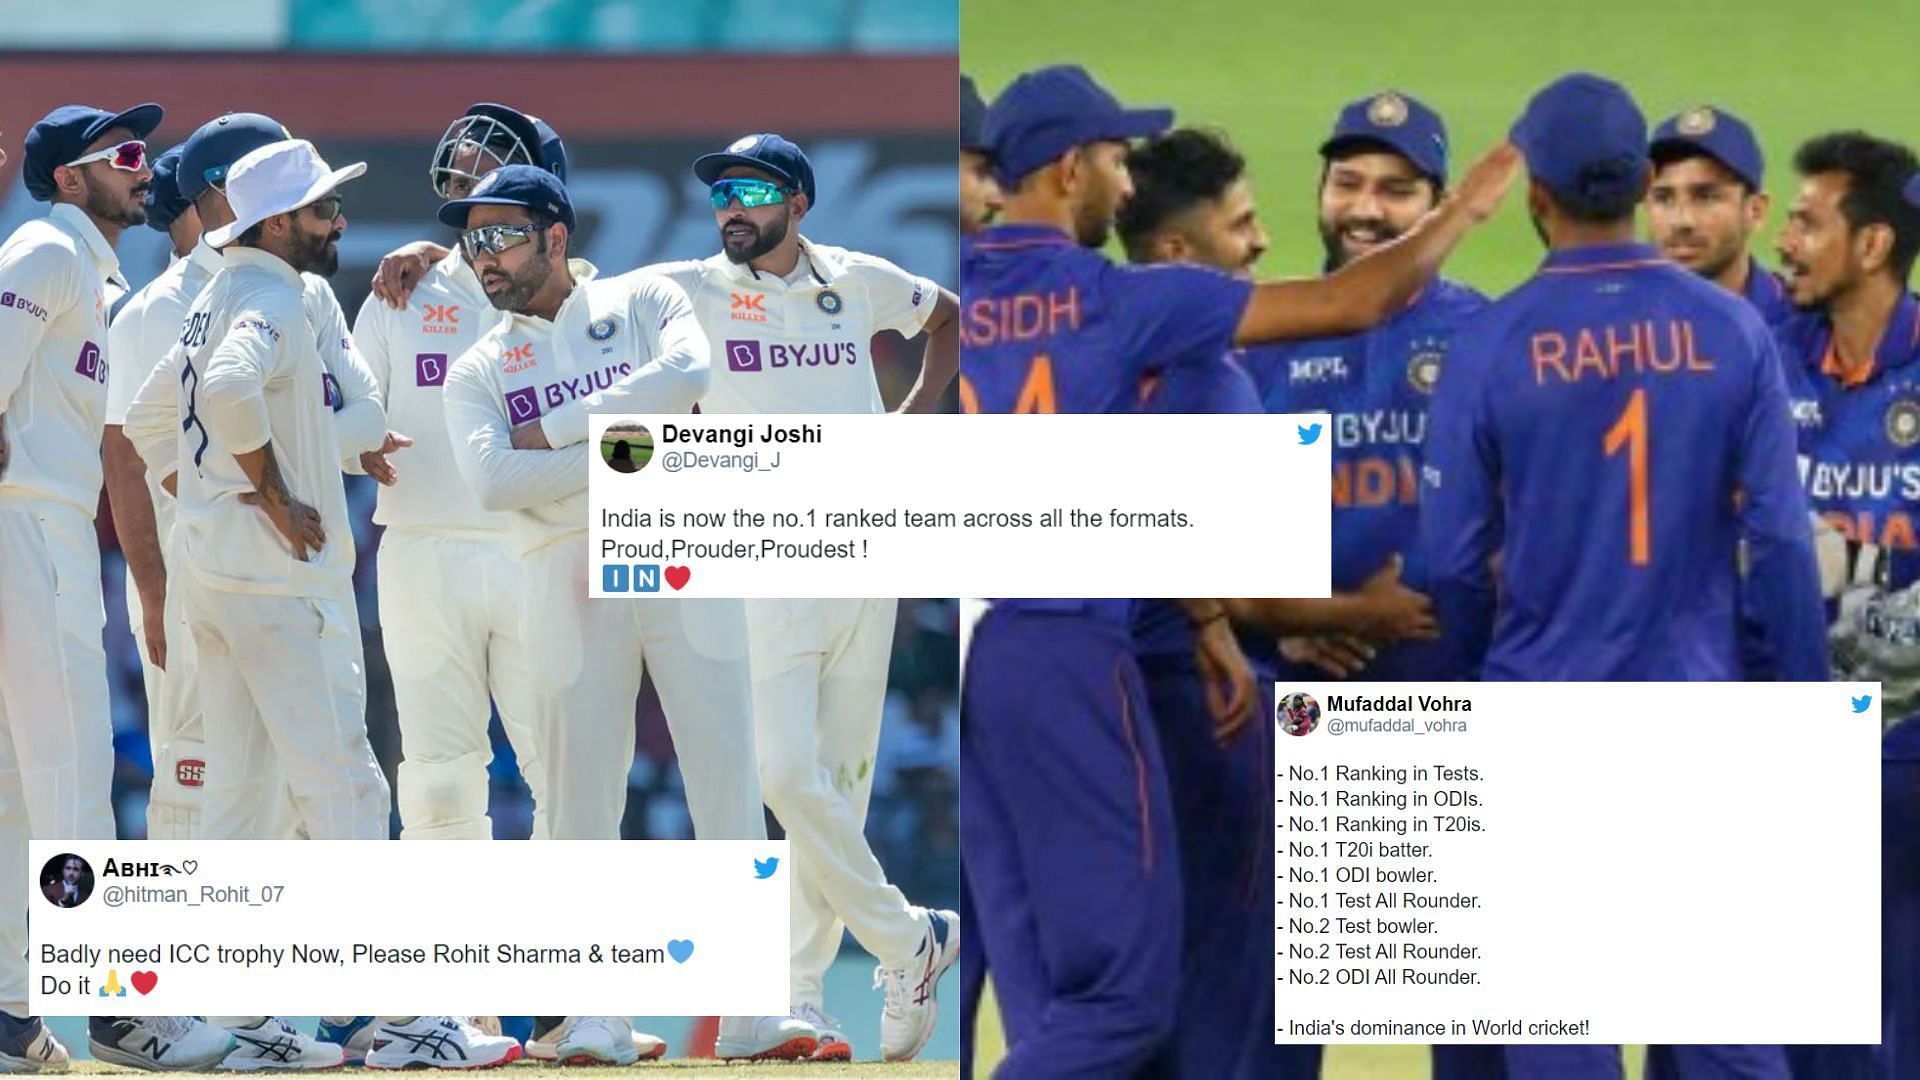 Fans hailed Team India for reaching the pinnacle across formats (P.C.:Twitter)